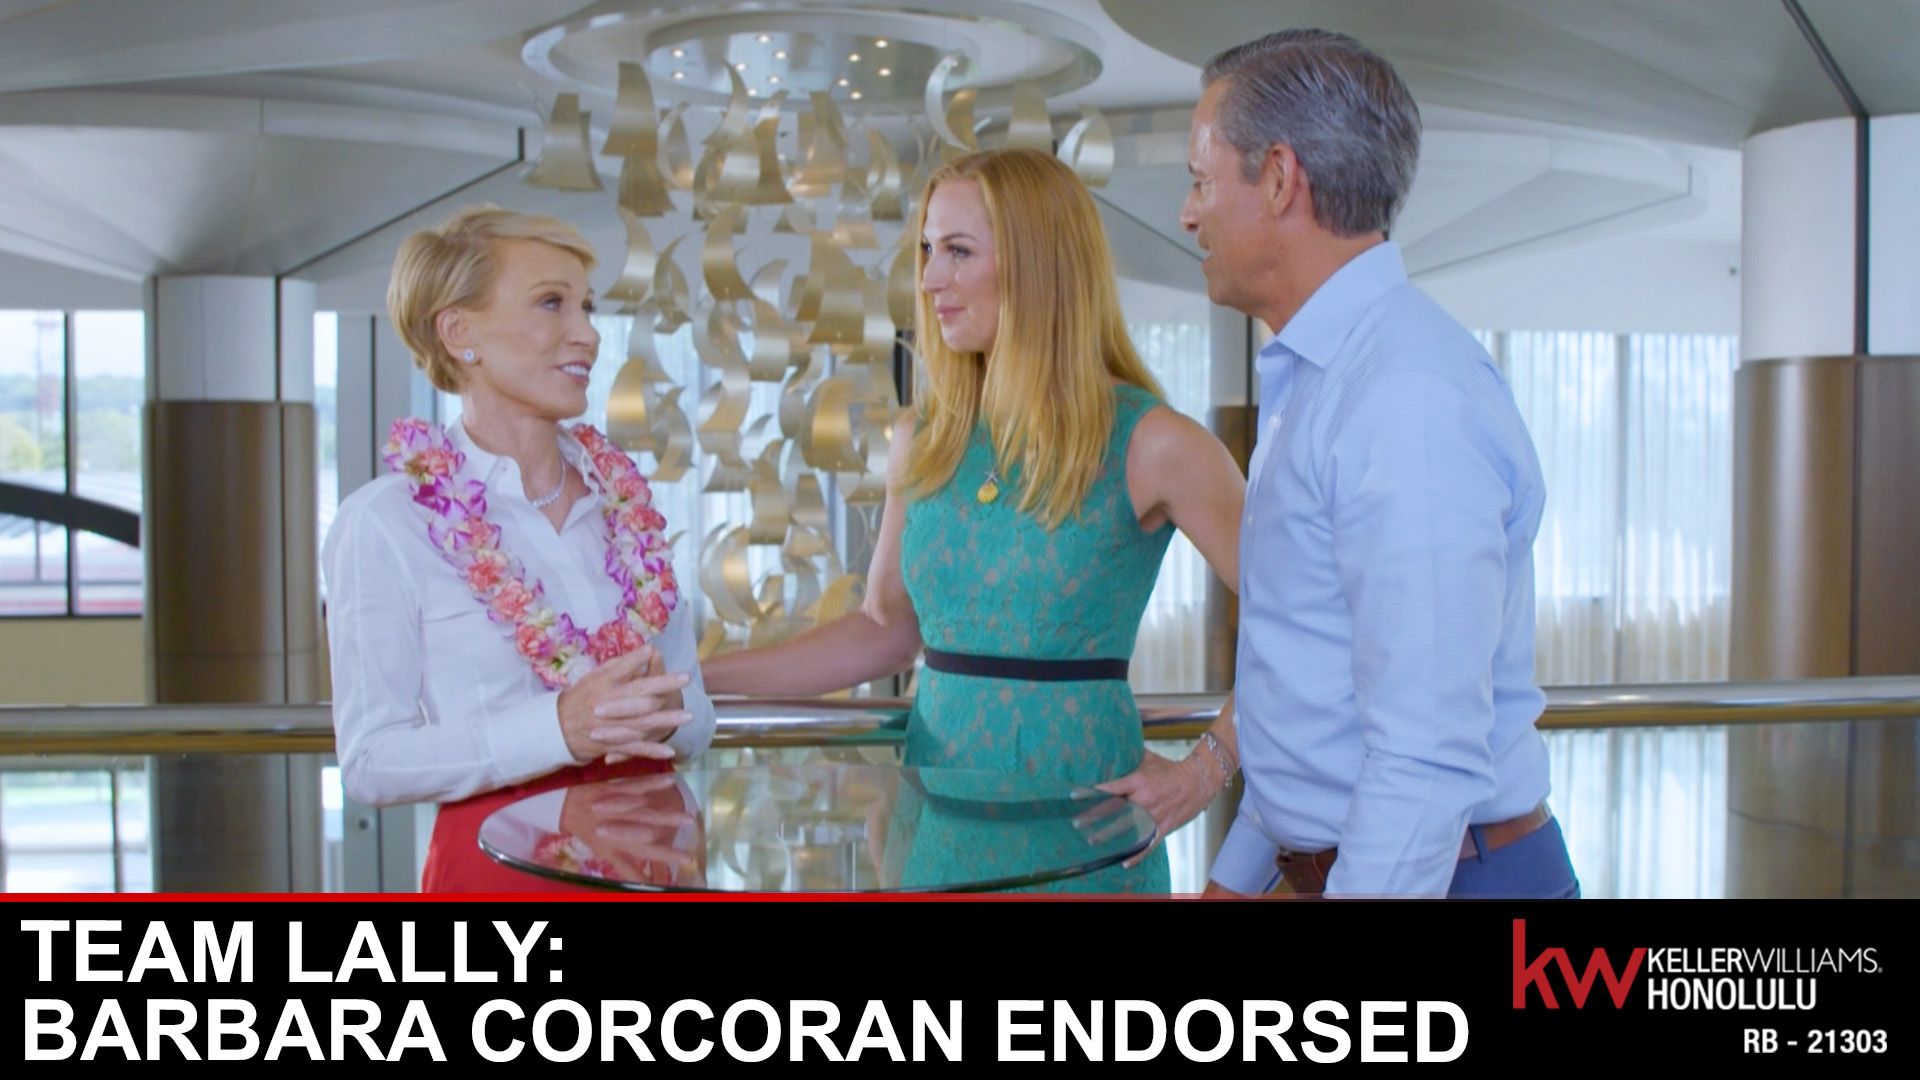 We’re Barbara Corcoran’s Only Endorsed Team in Hawaii